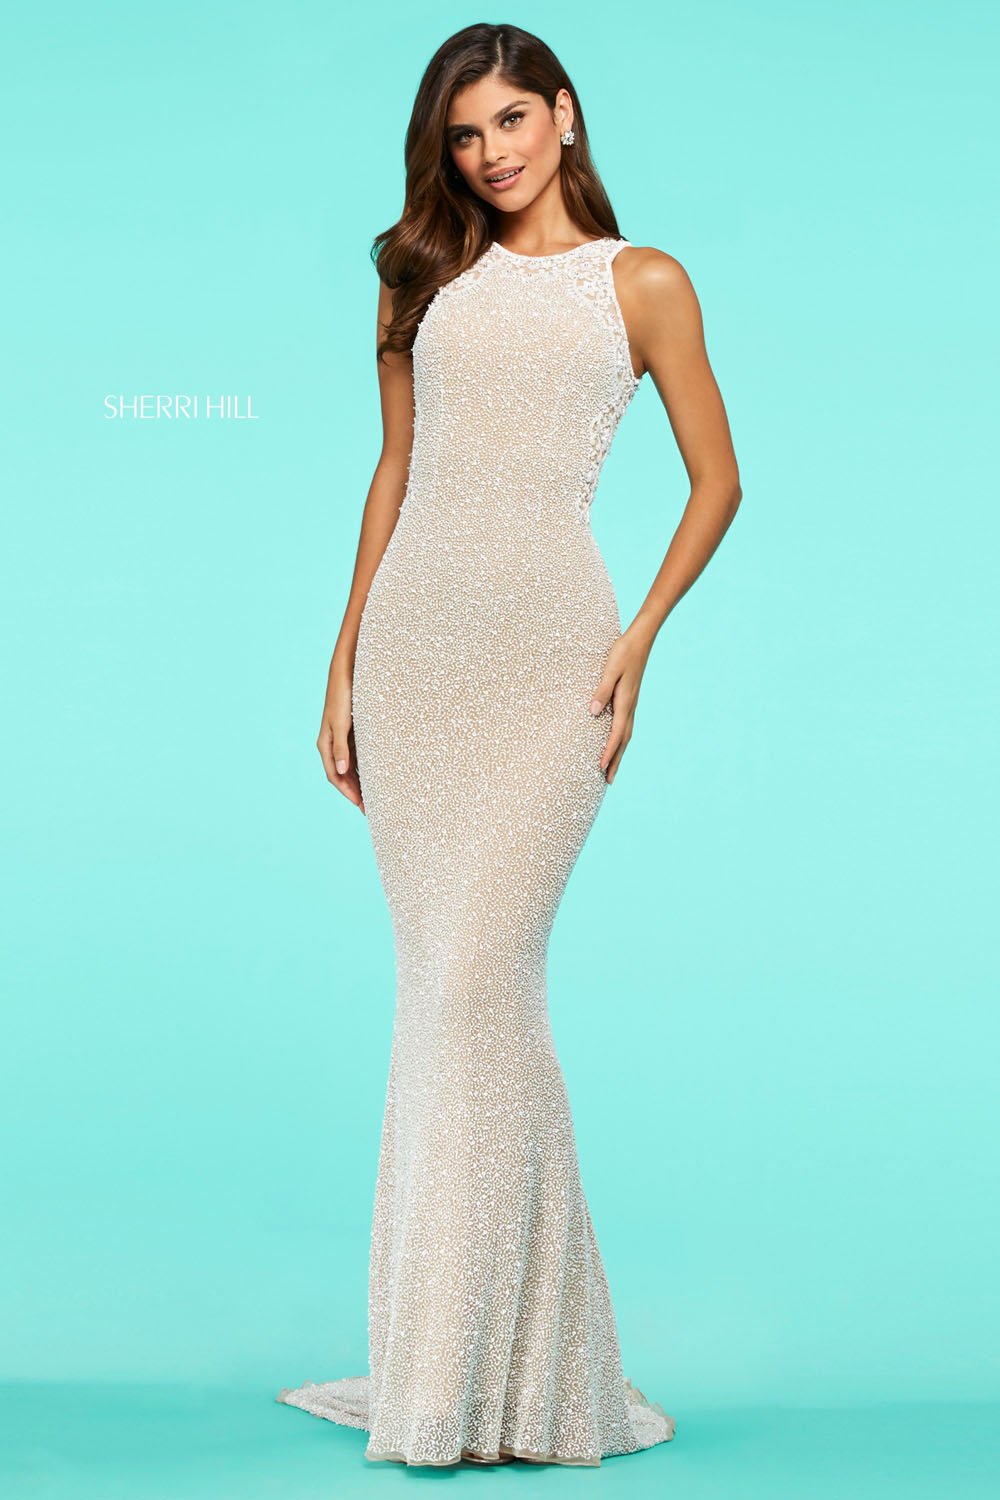 Sherri Hill 53490 dress images in these colors: Nude Ivory, Lilac Nude.